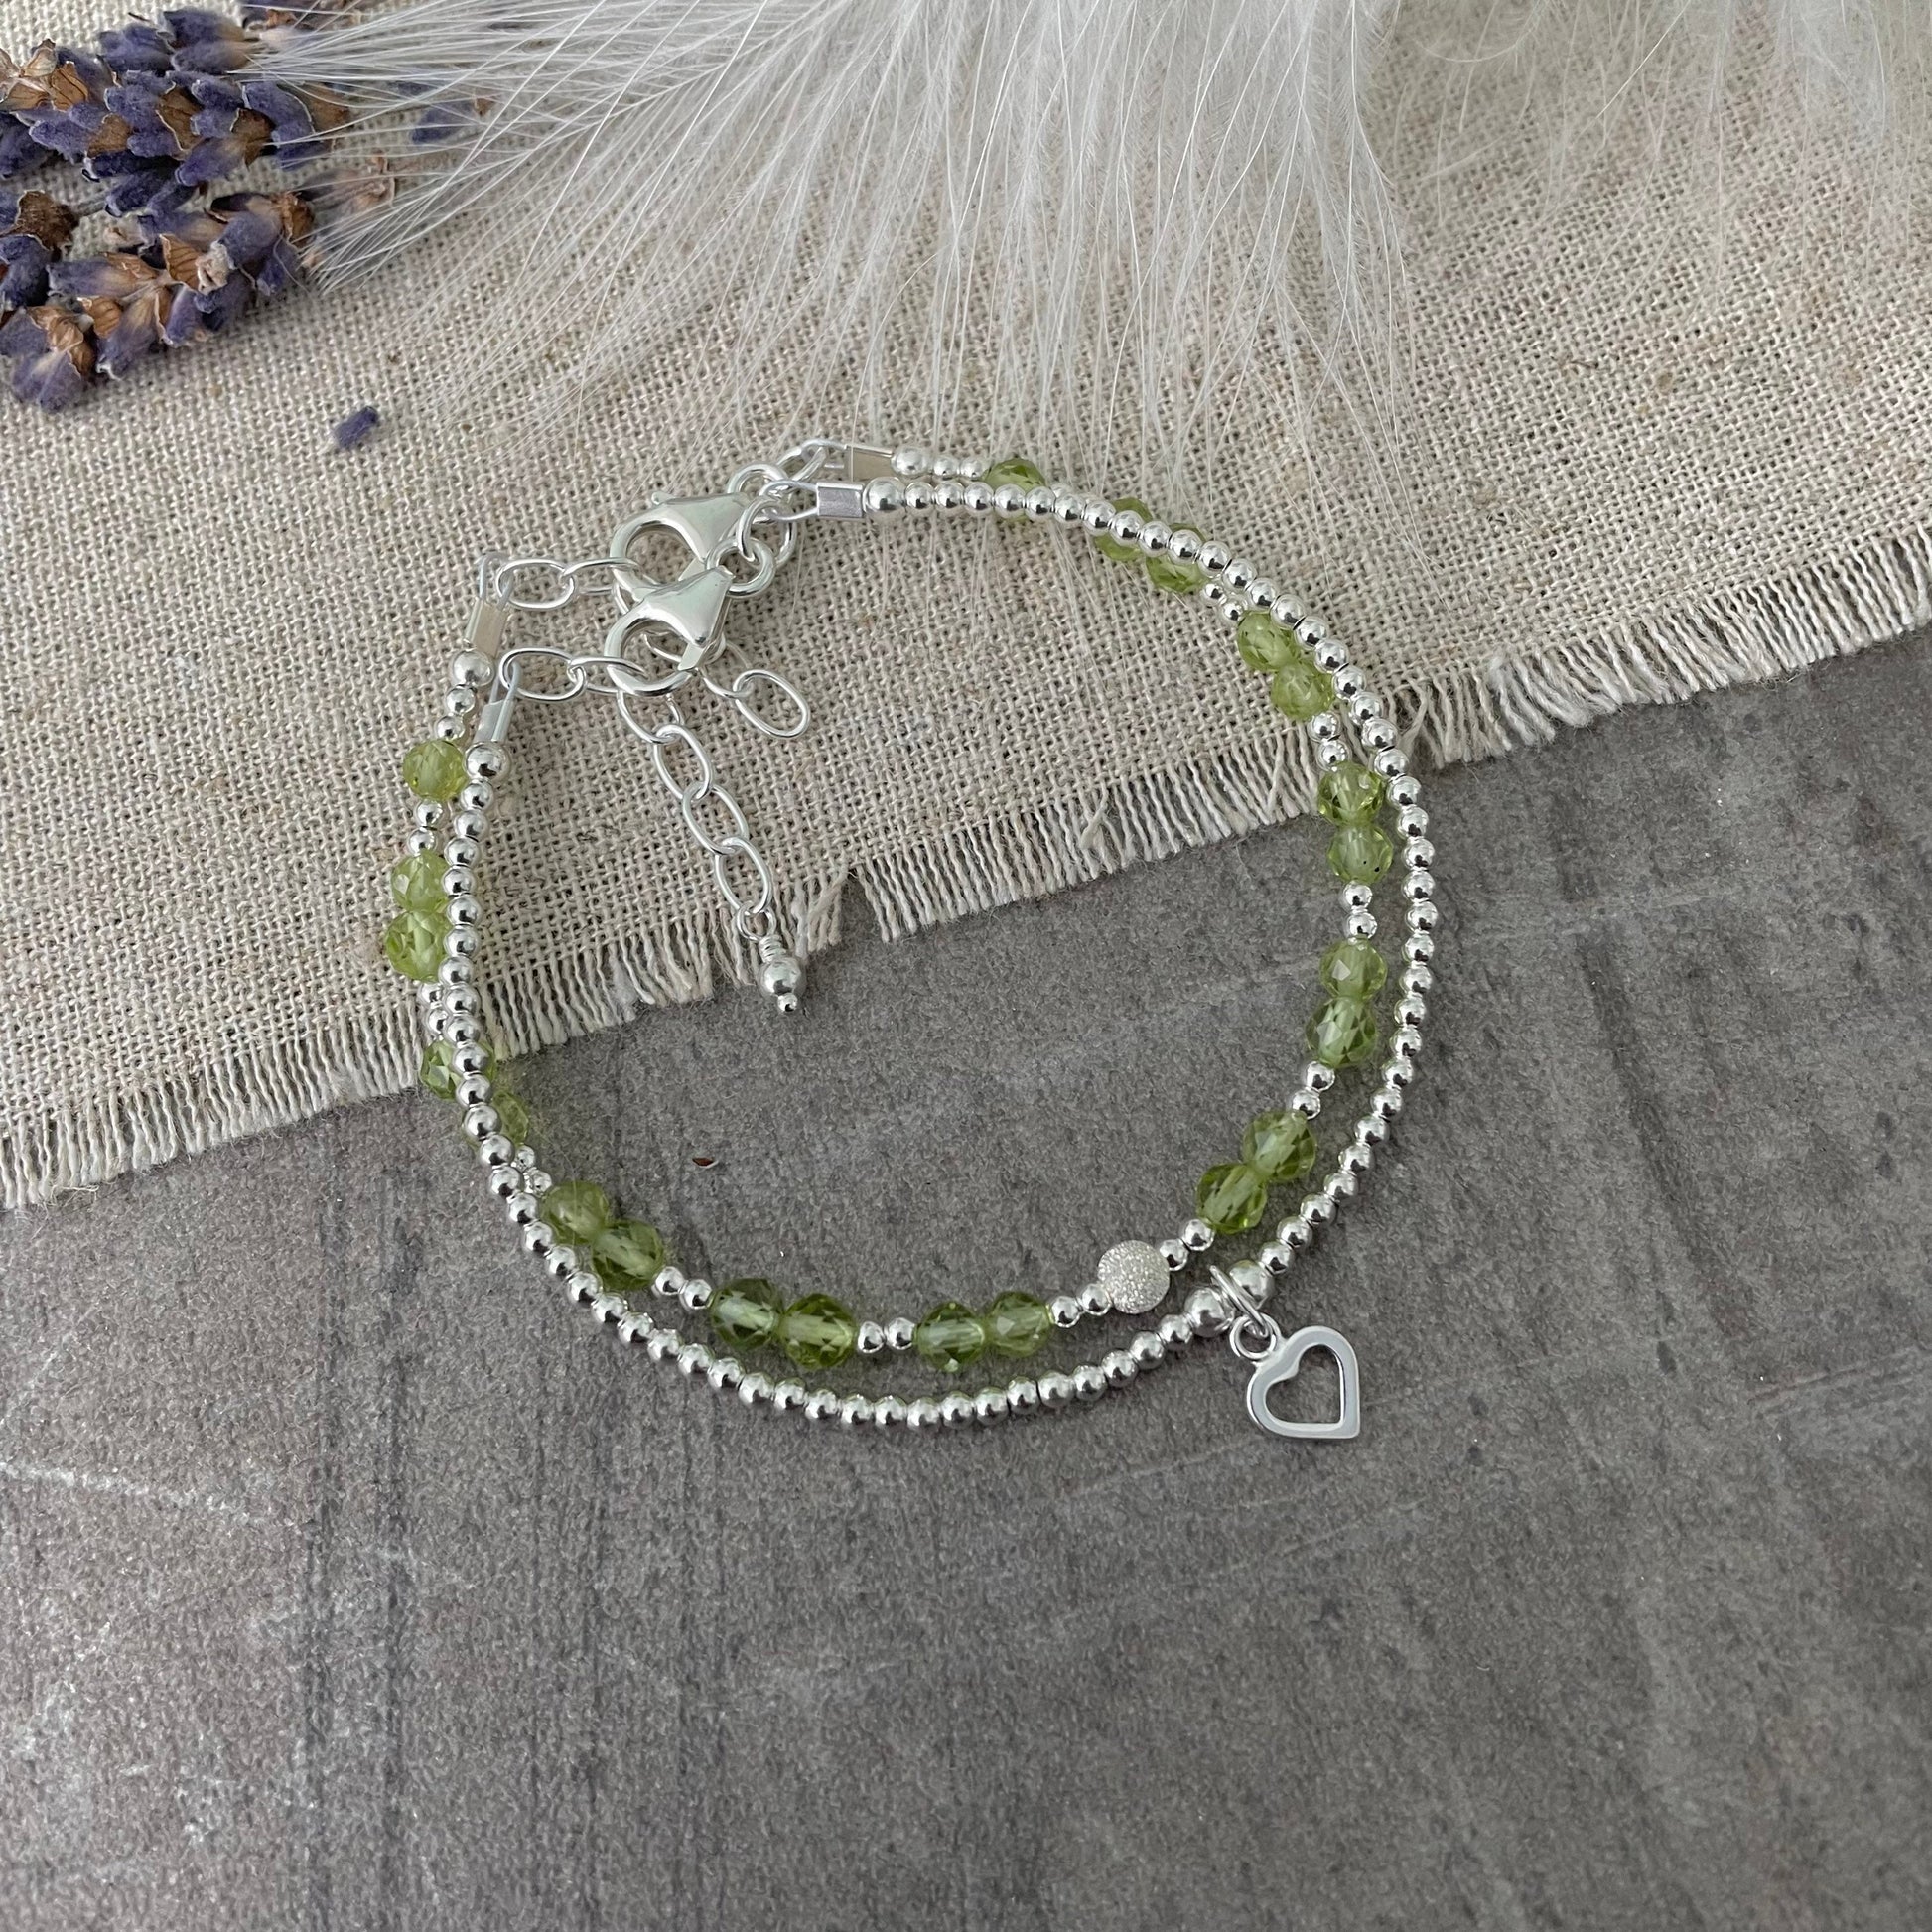 Peridot Bracelet Set made with August Birthstone and Sterling Silver, August Birthday Gift for Women